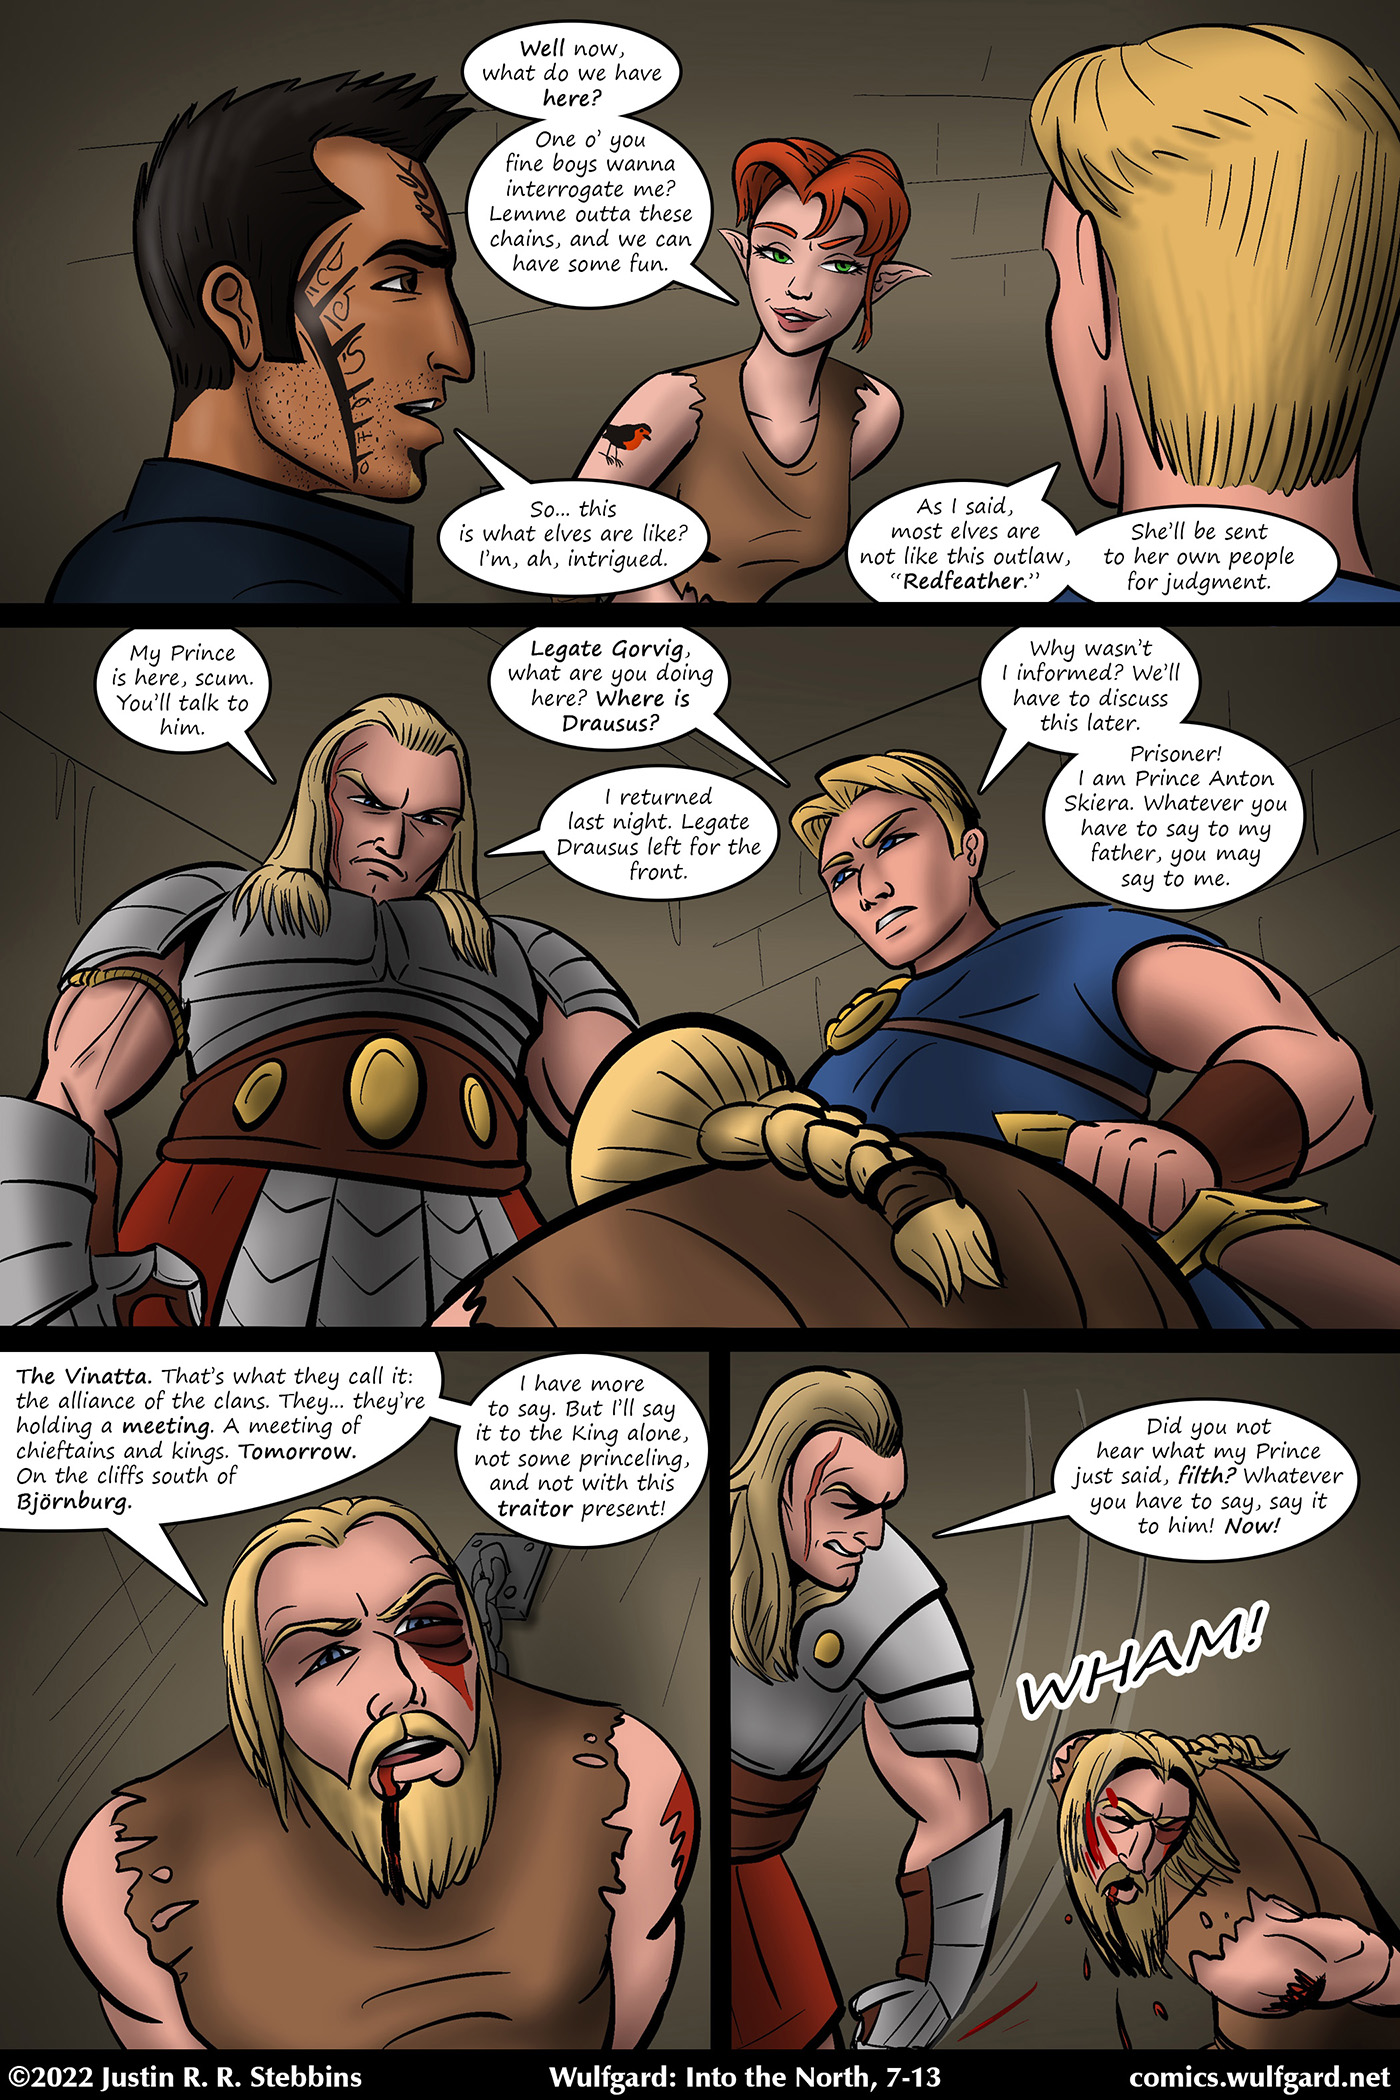 Wulfgard: Into the North, Chapter 7 Page 13